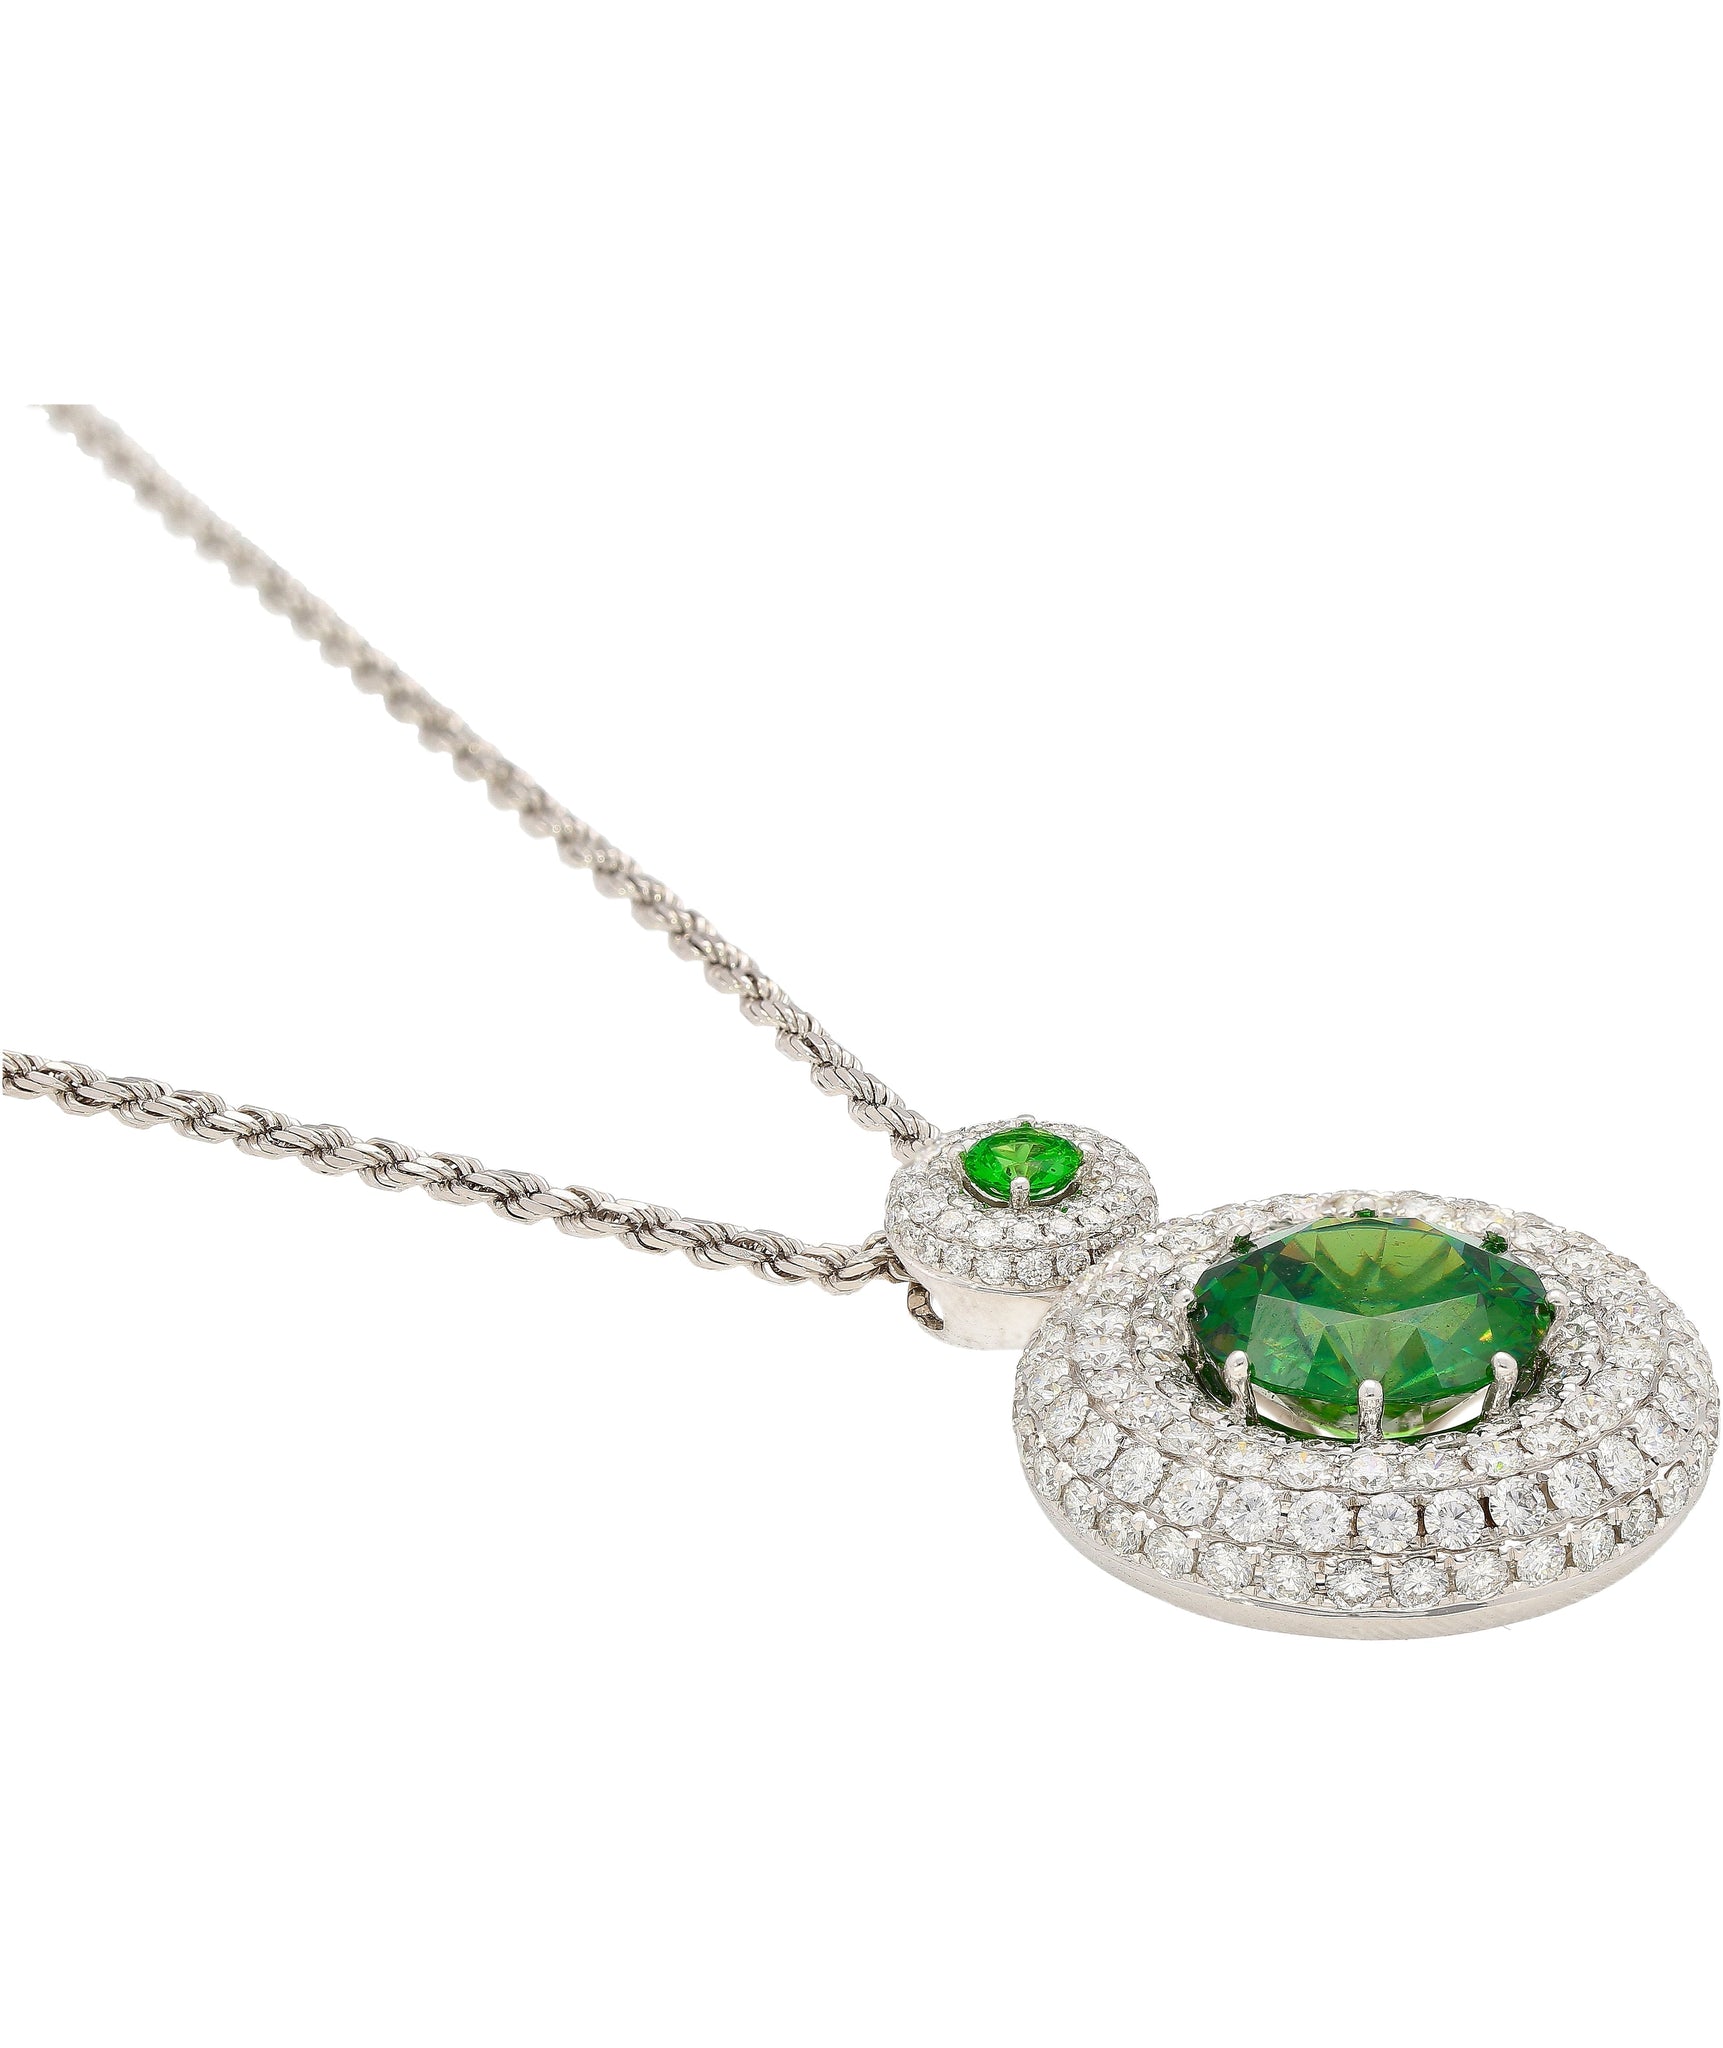 GIA Certified 8.58 Carat Demantoid Pendant Necklace with Diamond Halo in 18K White Gold